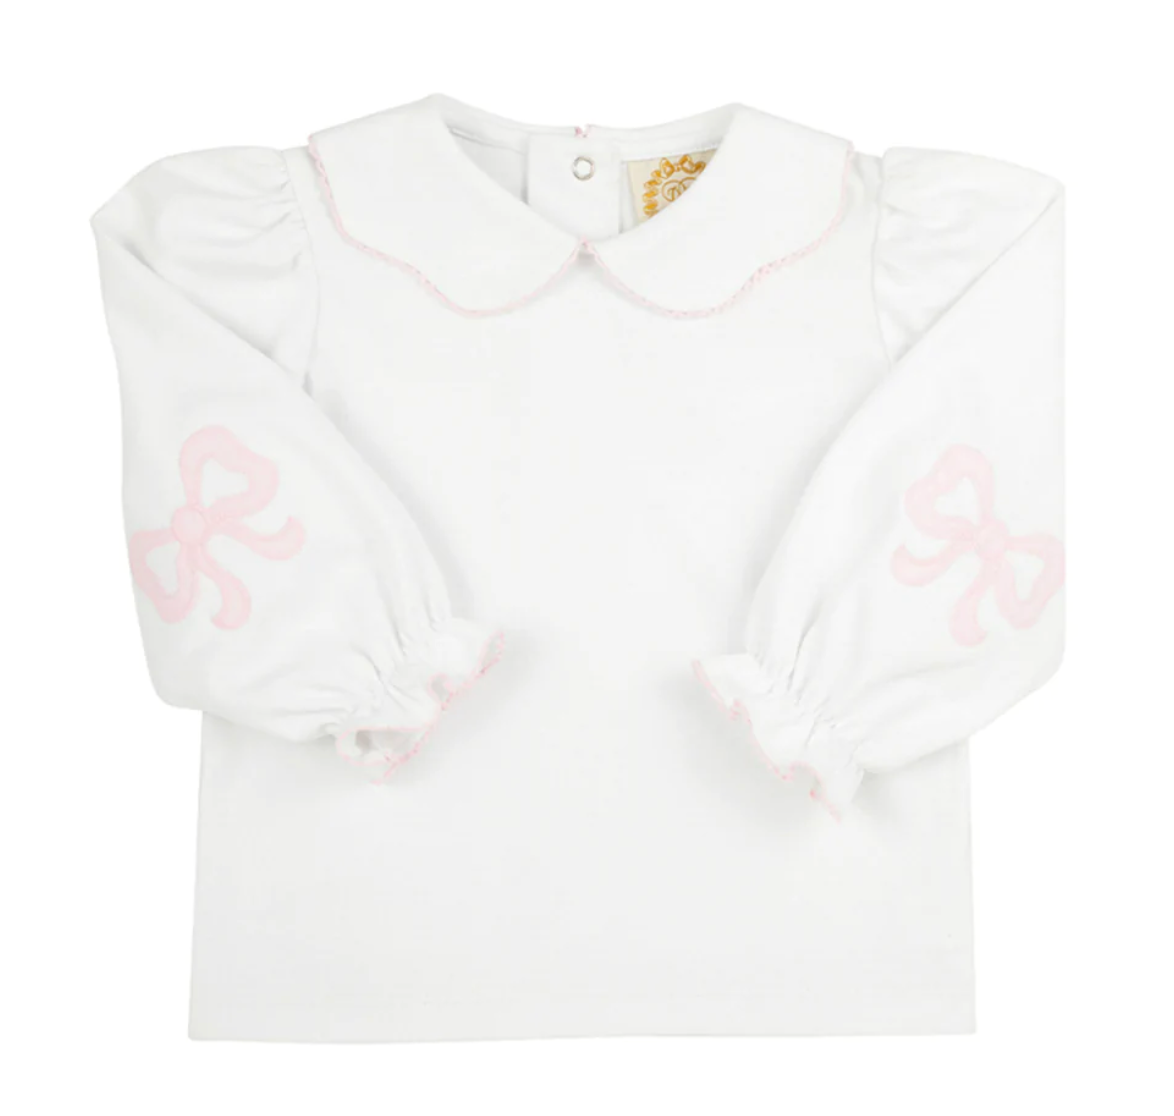 Emma's Elbow Patch Top-White with Pink